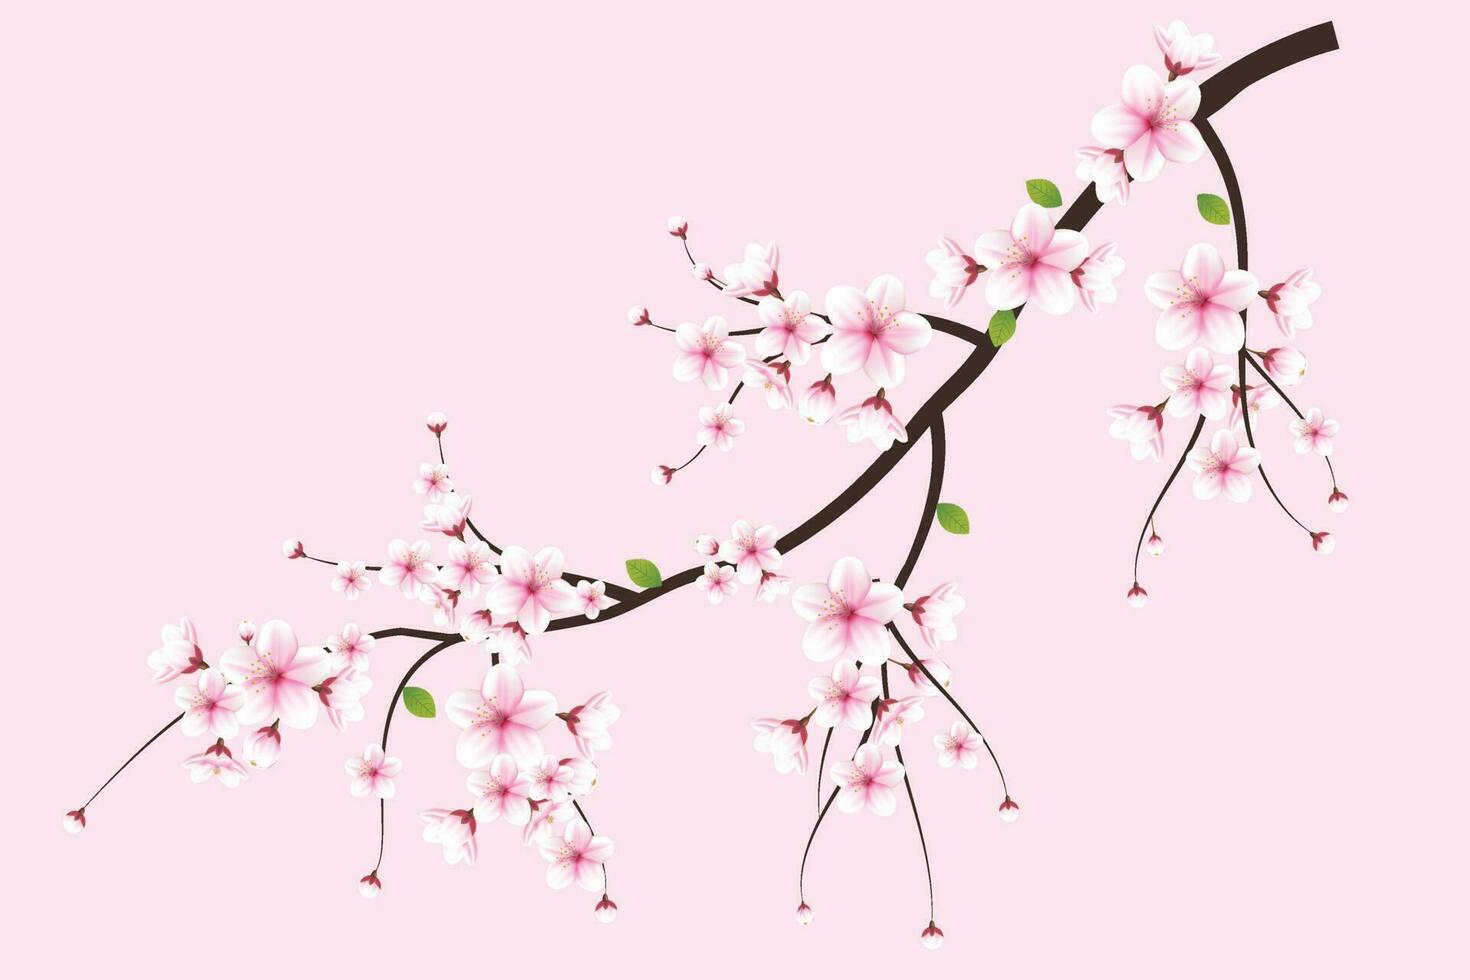 Realistic blooming cherry flowers and petals illustration,cherry blossom vector. pink sakura flower background. cherry blossom flower blooming vector